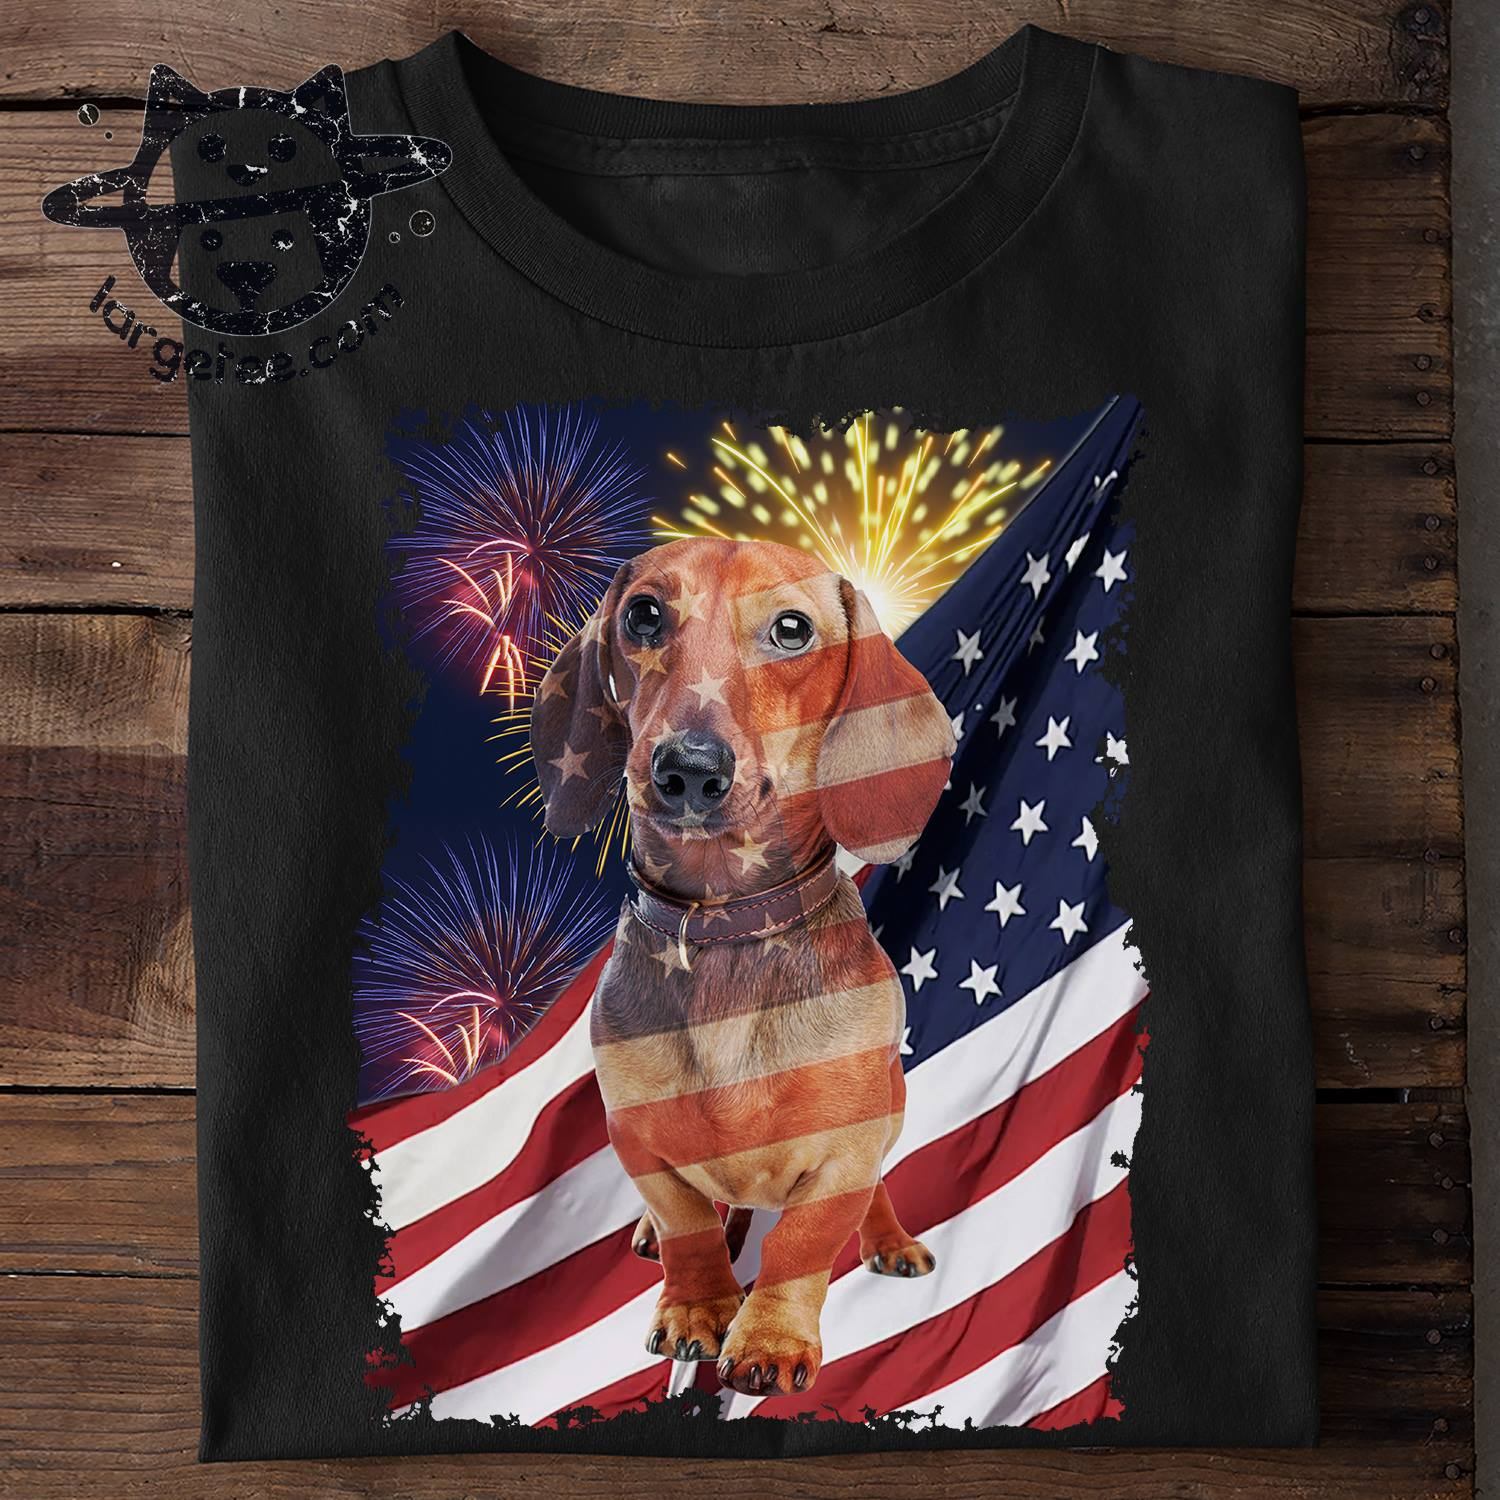 Dachshund Dog - america flag, 4th of July, Independence day